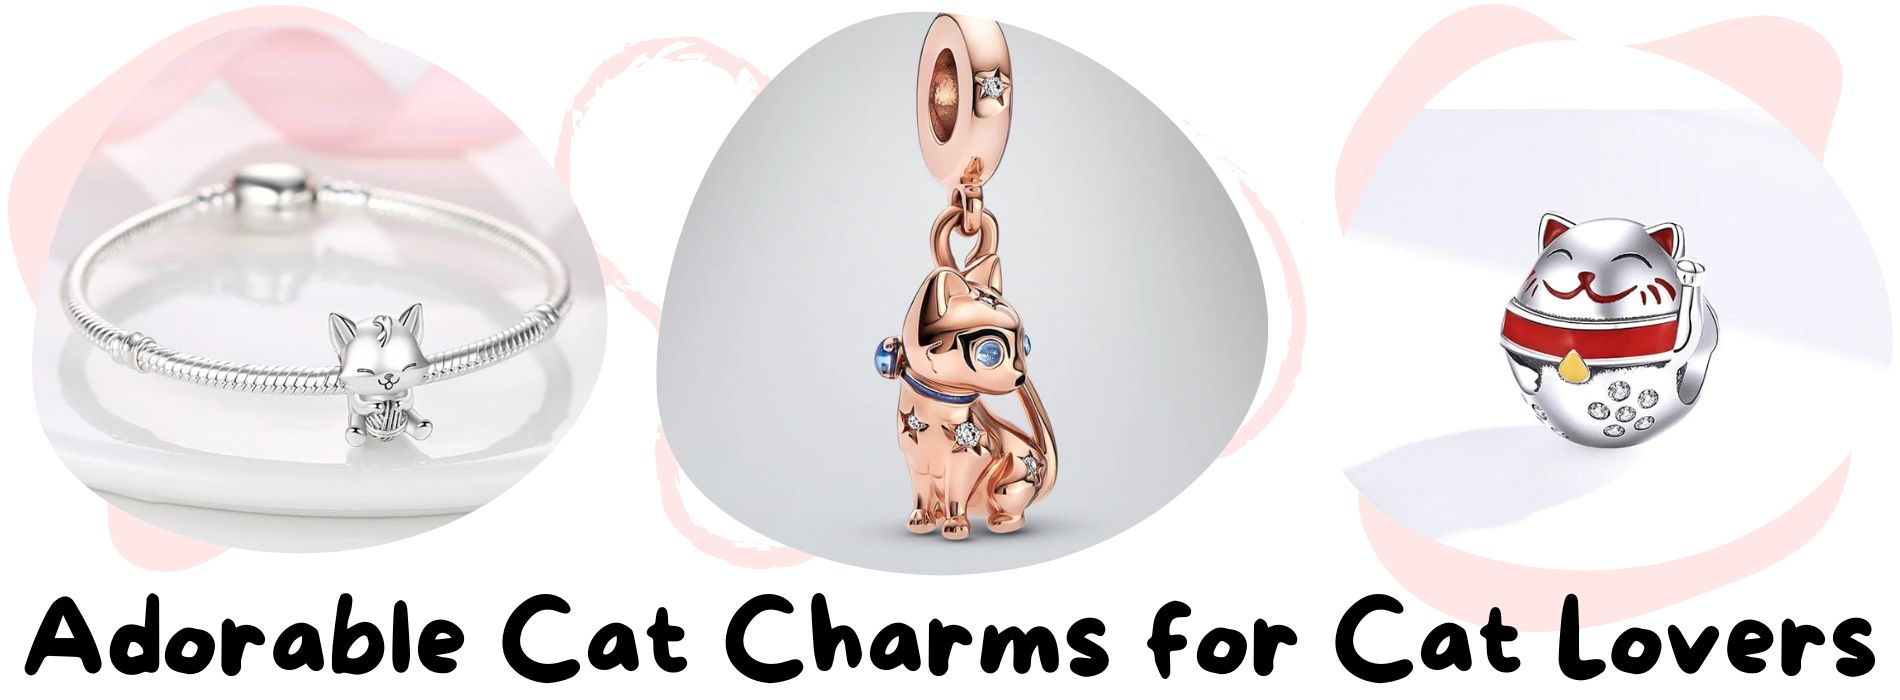 cat-charms